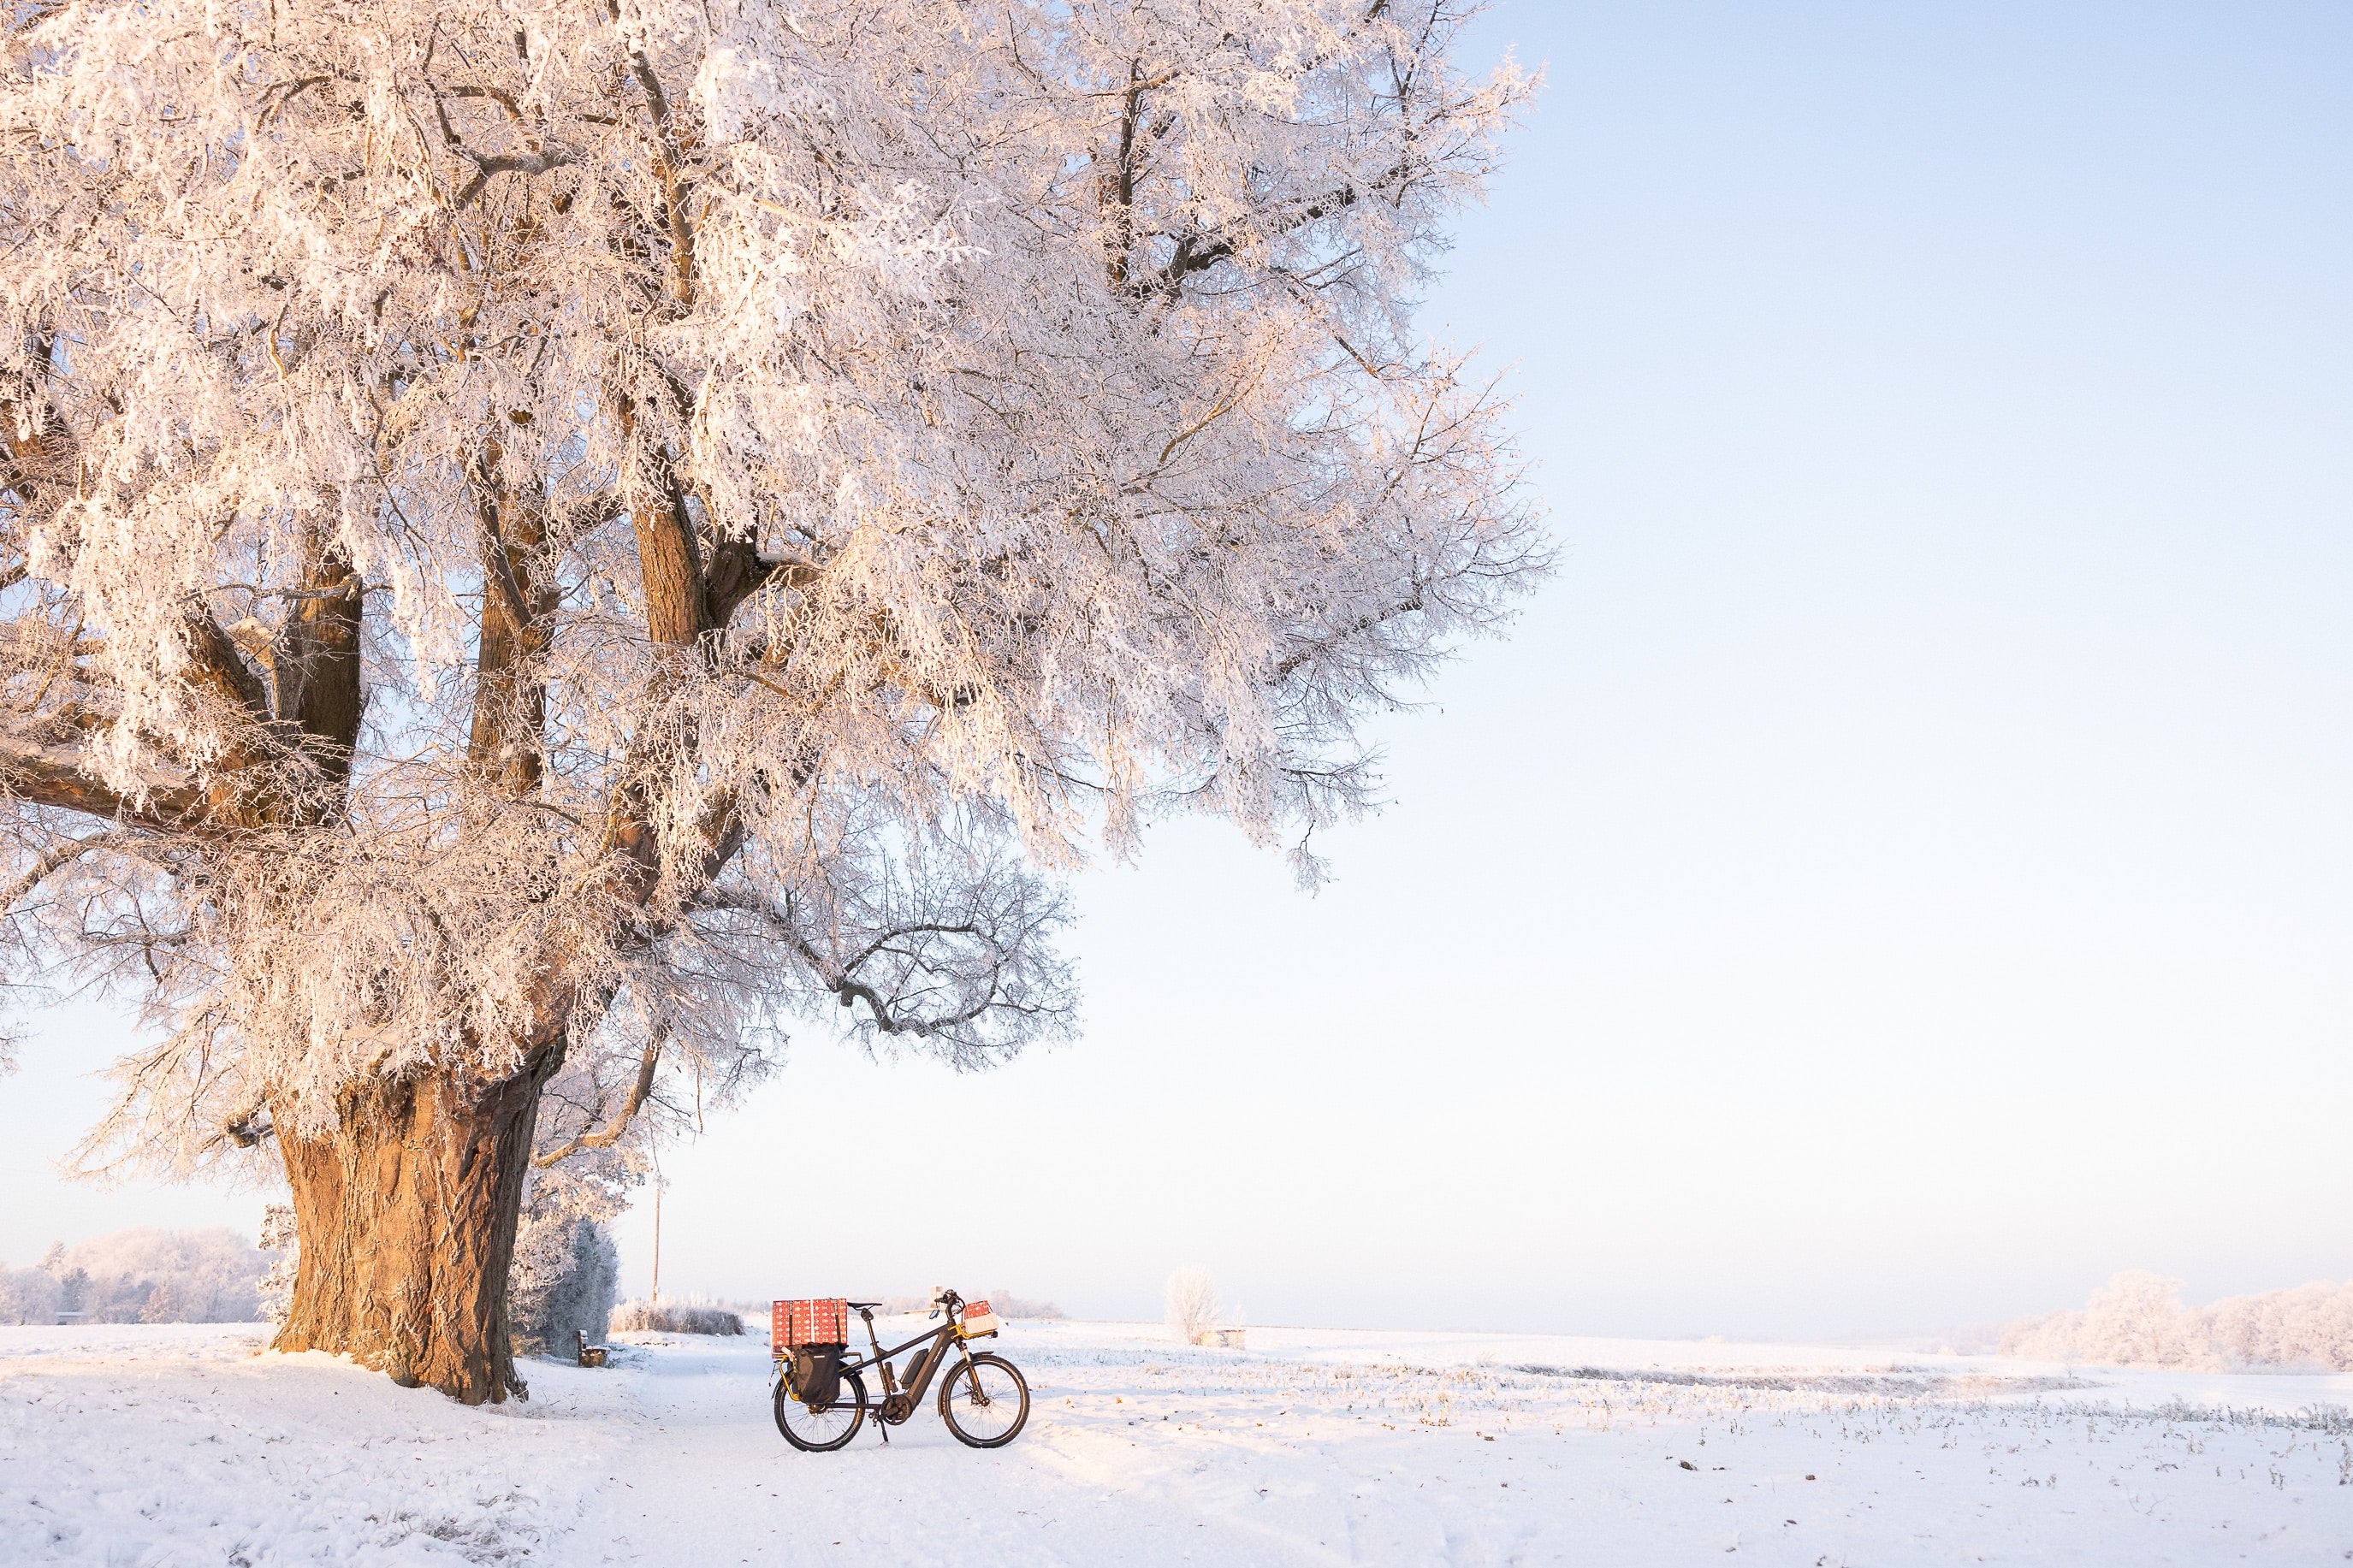 Top Winter Travel Tips: Biking and Exploring Safely in December